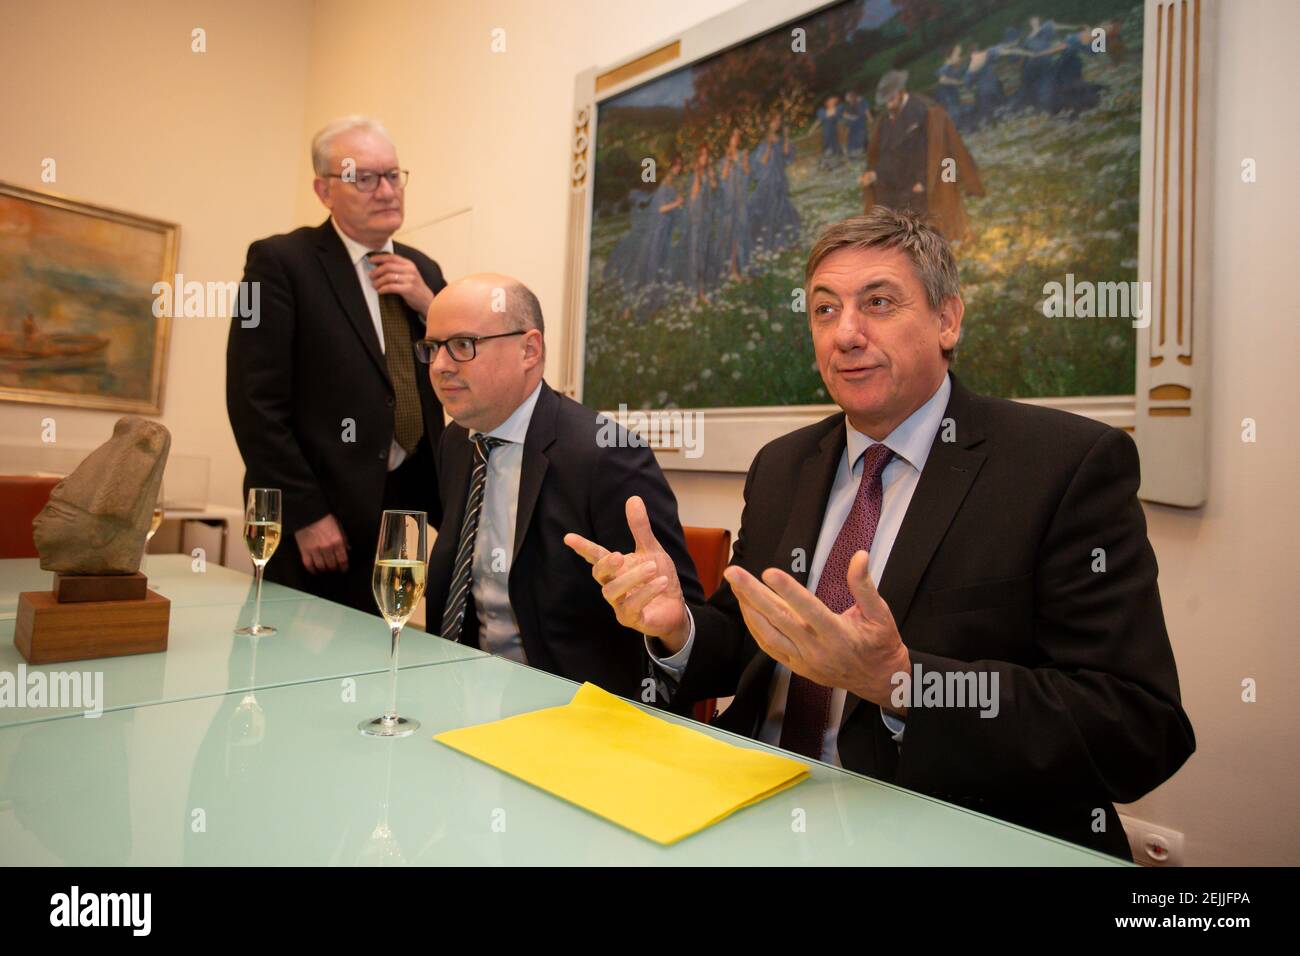 Flemish Minister President Jan Jambon (R) pictured during a visit to the  expo 'Rubens, Van Dyck and the Splendour of Flemish Painting' at the  Budapest Museum for Fine Arts, during the visit